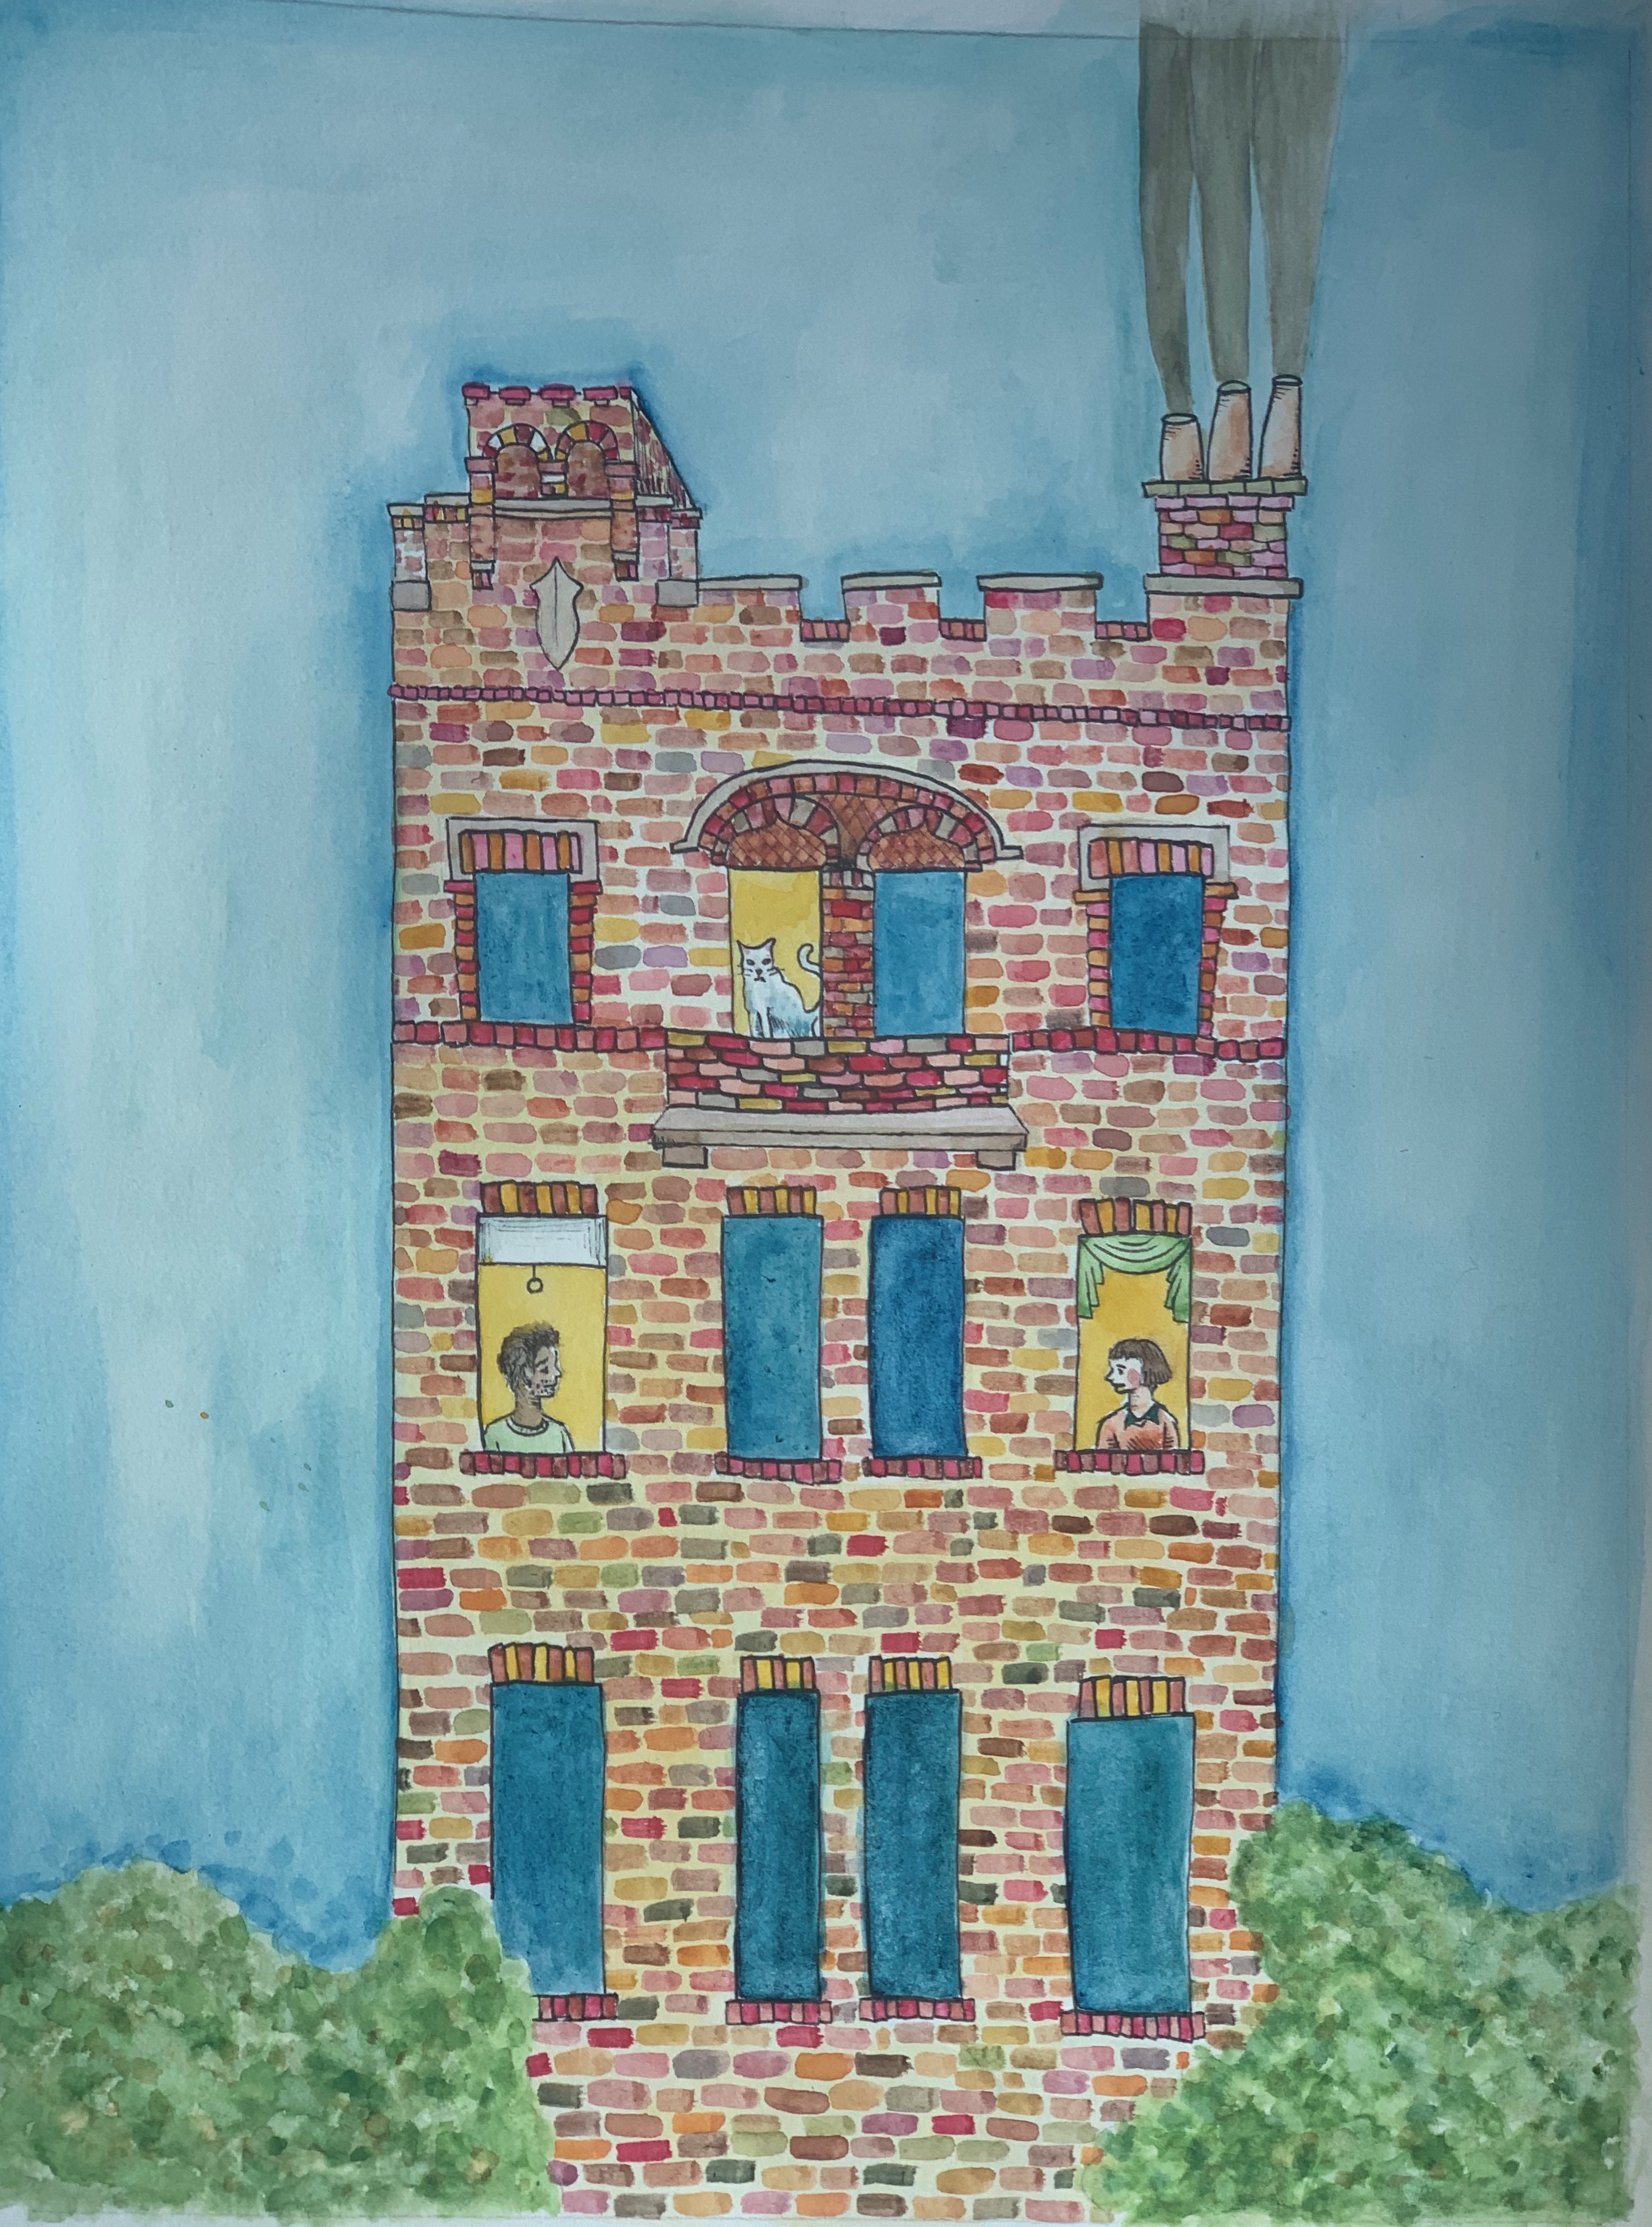 Cover art image for the 2020 edition of CSWR, an illustration of a brick apartment building